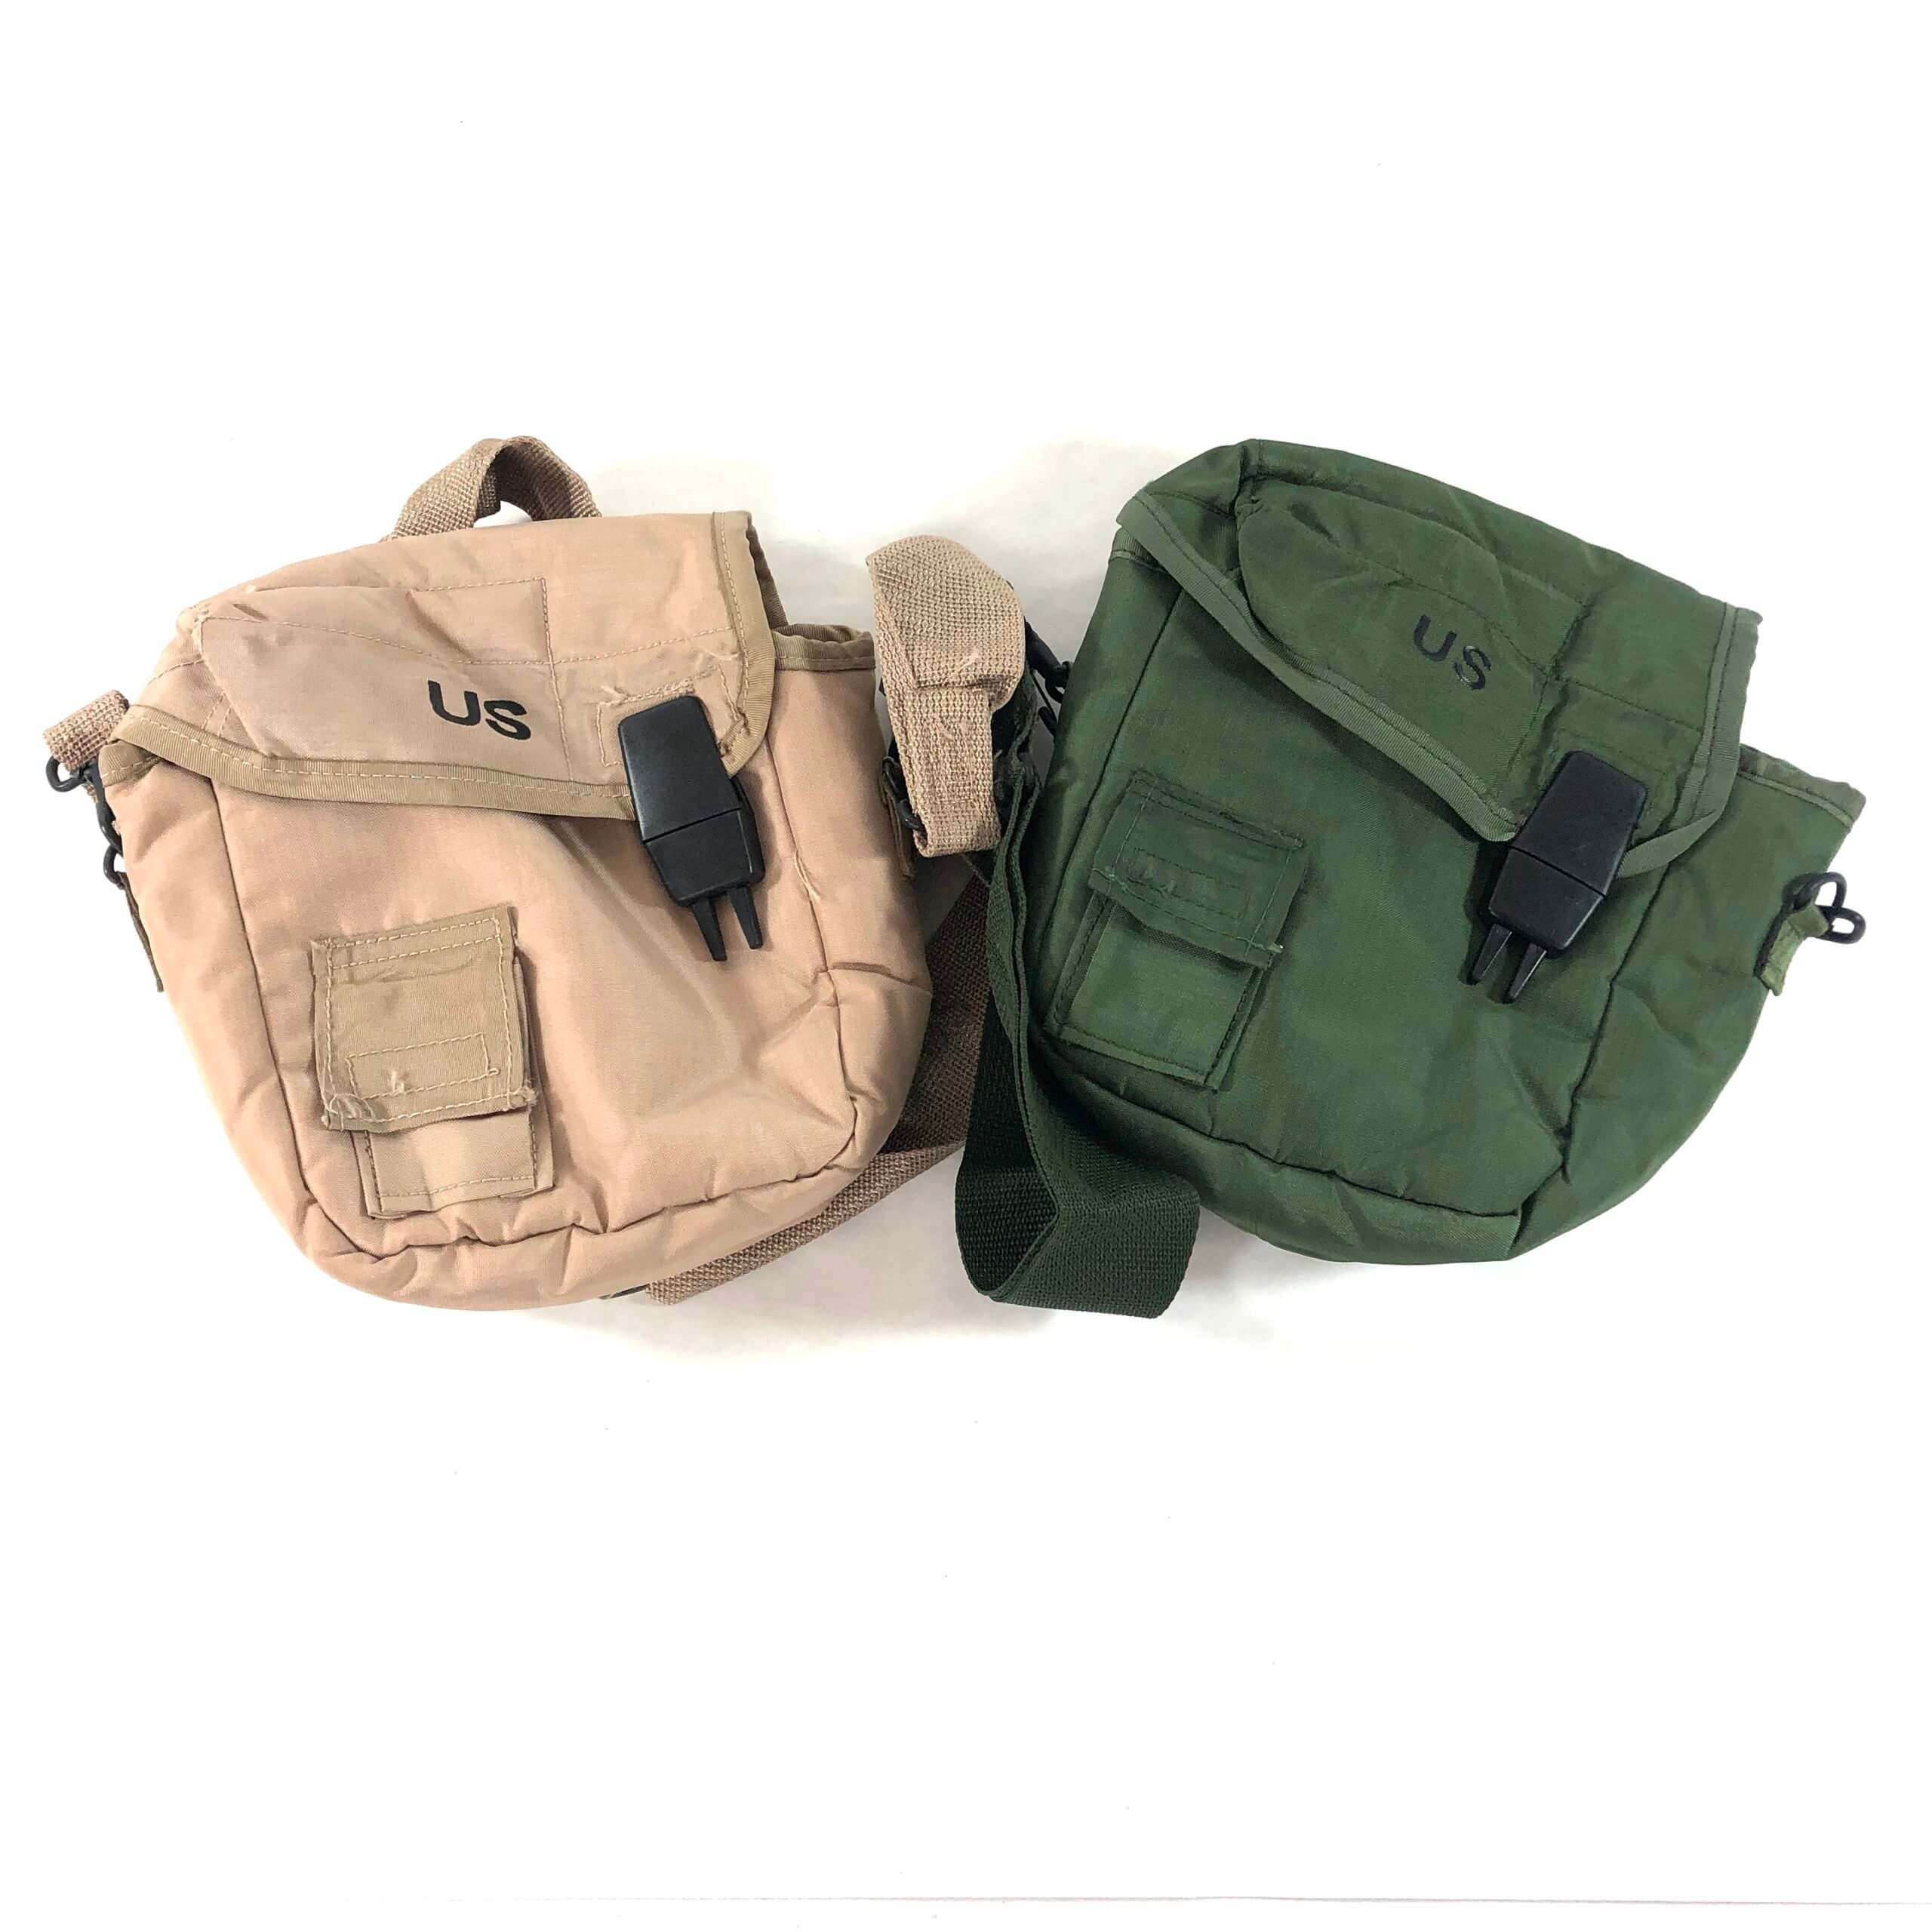 US Military 3 Pc Set 1 QT OD Canteen w MOLLE ACU Pouch Cover & Stainless Cup VGC 